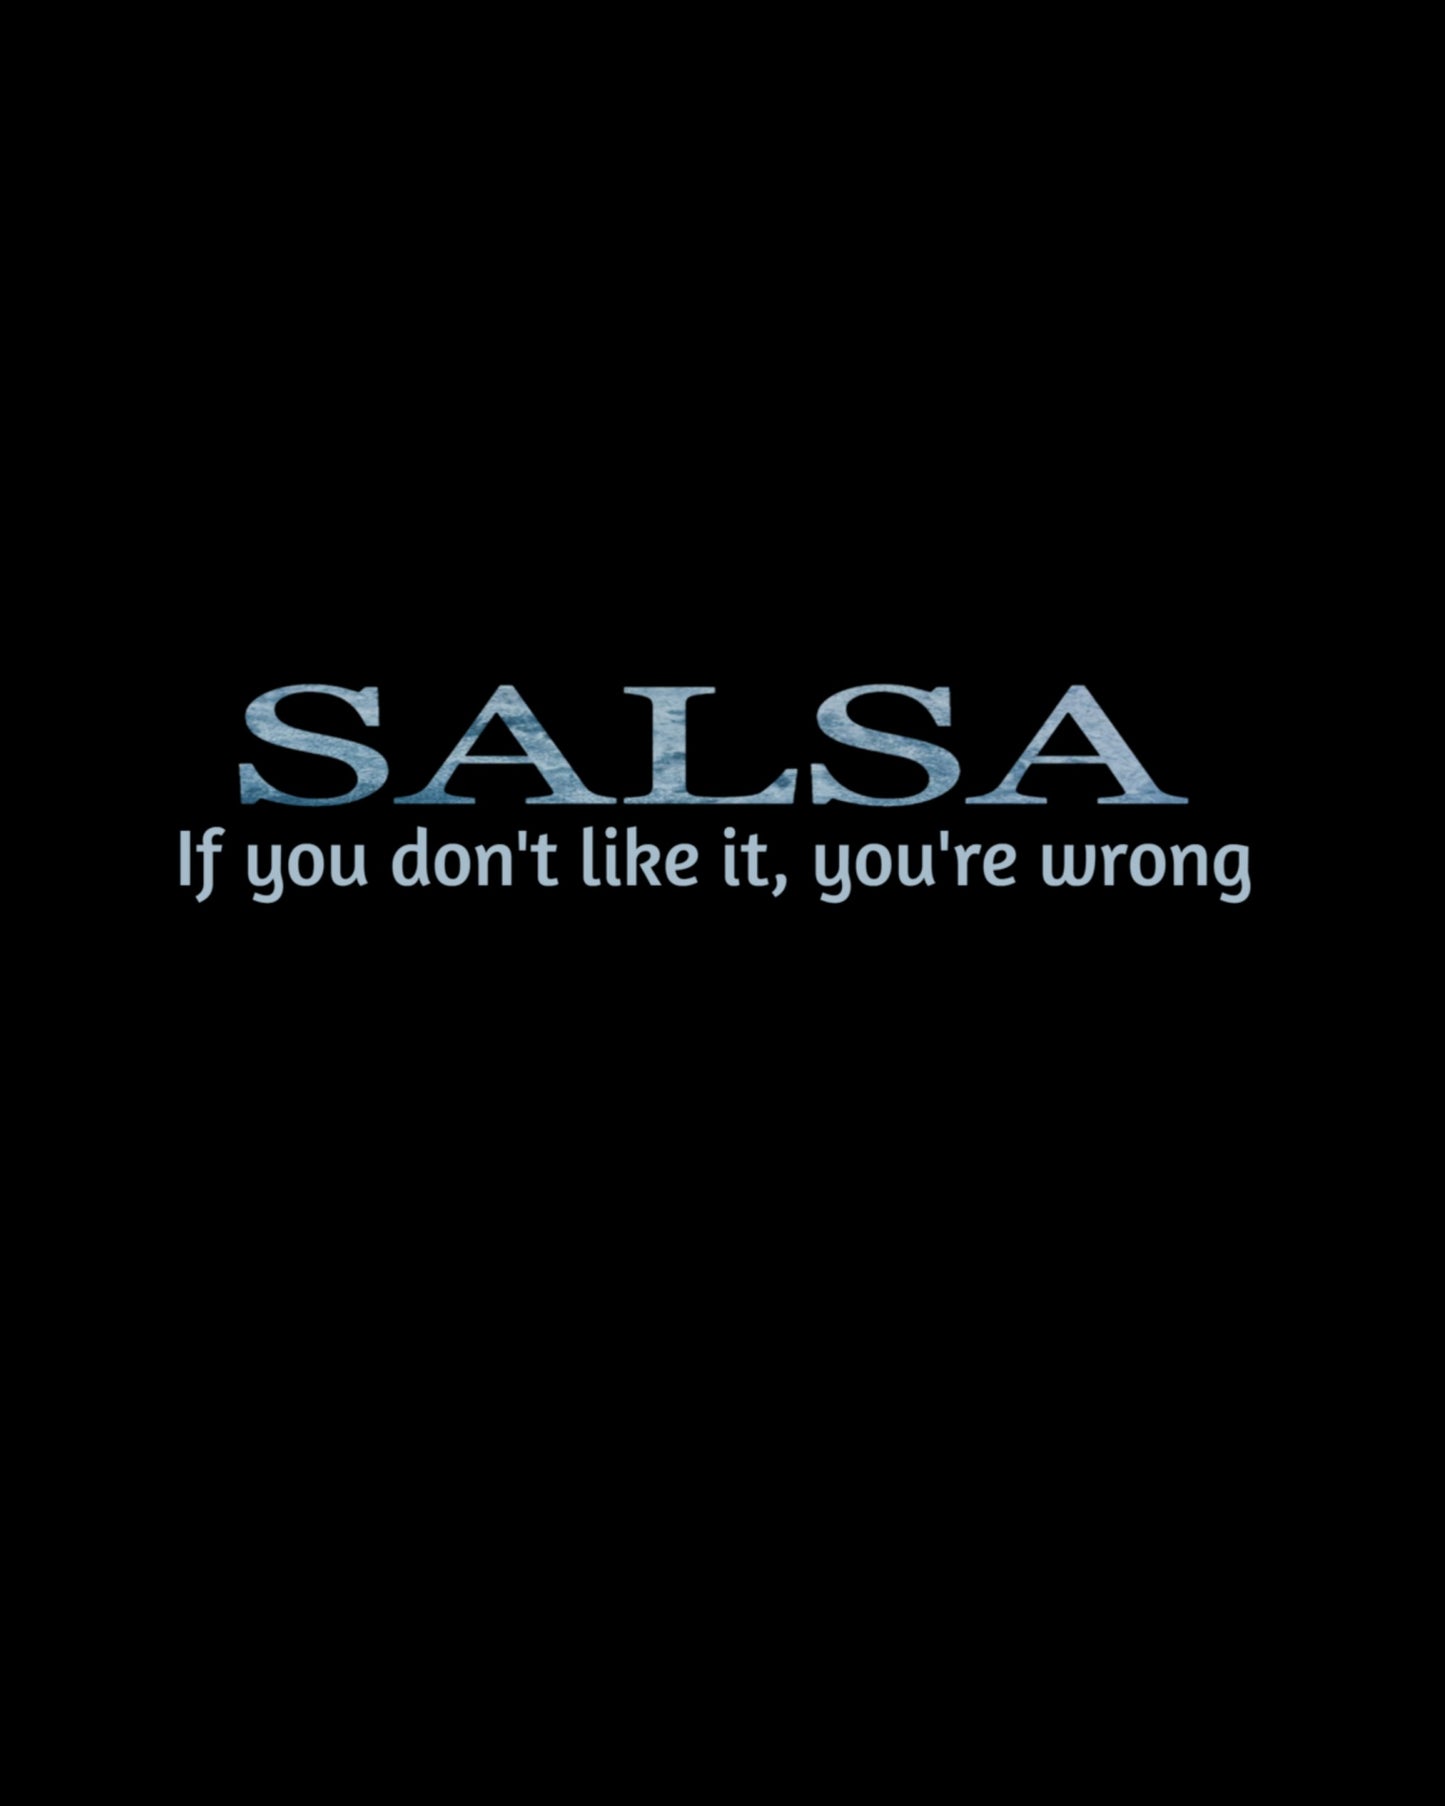 SALSA. If you don't like it, you're wrong